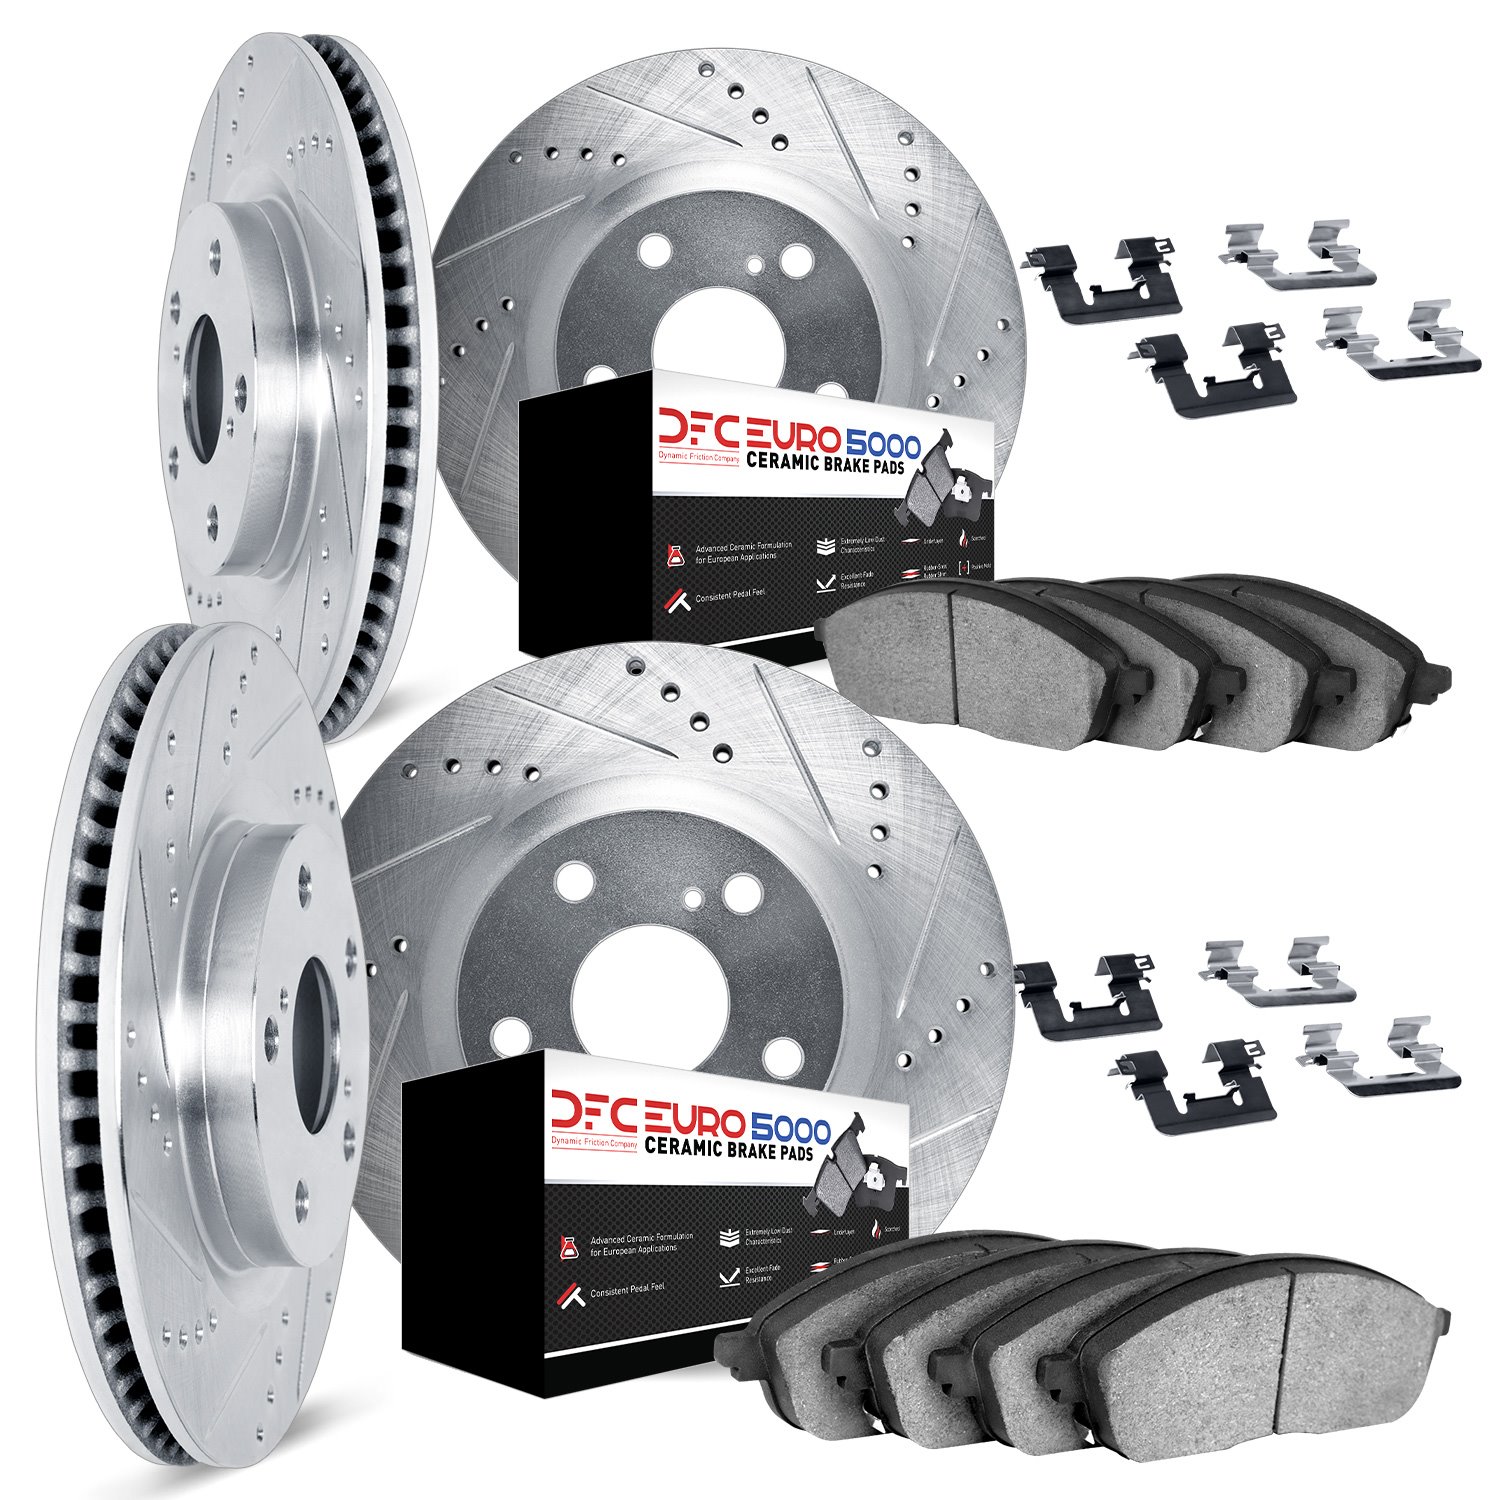 7614-31033 Drilled/Slotted Brake Rotors w/5000 Euro Ceramic Brake Pads Kit & Hardware [Silver], Fits Select BMW, Position: Front